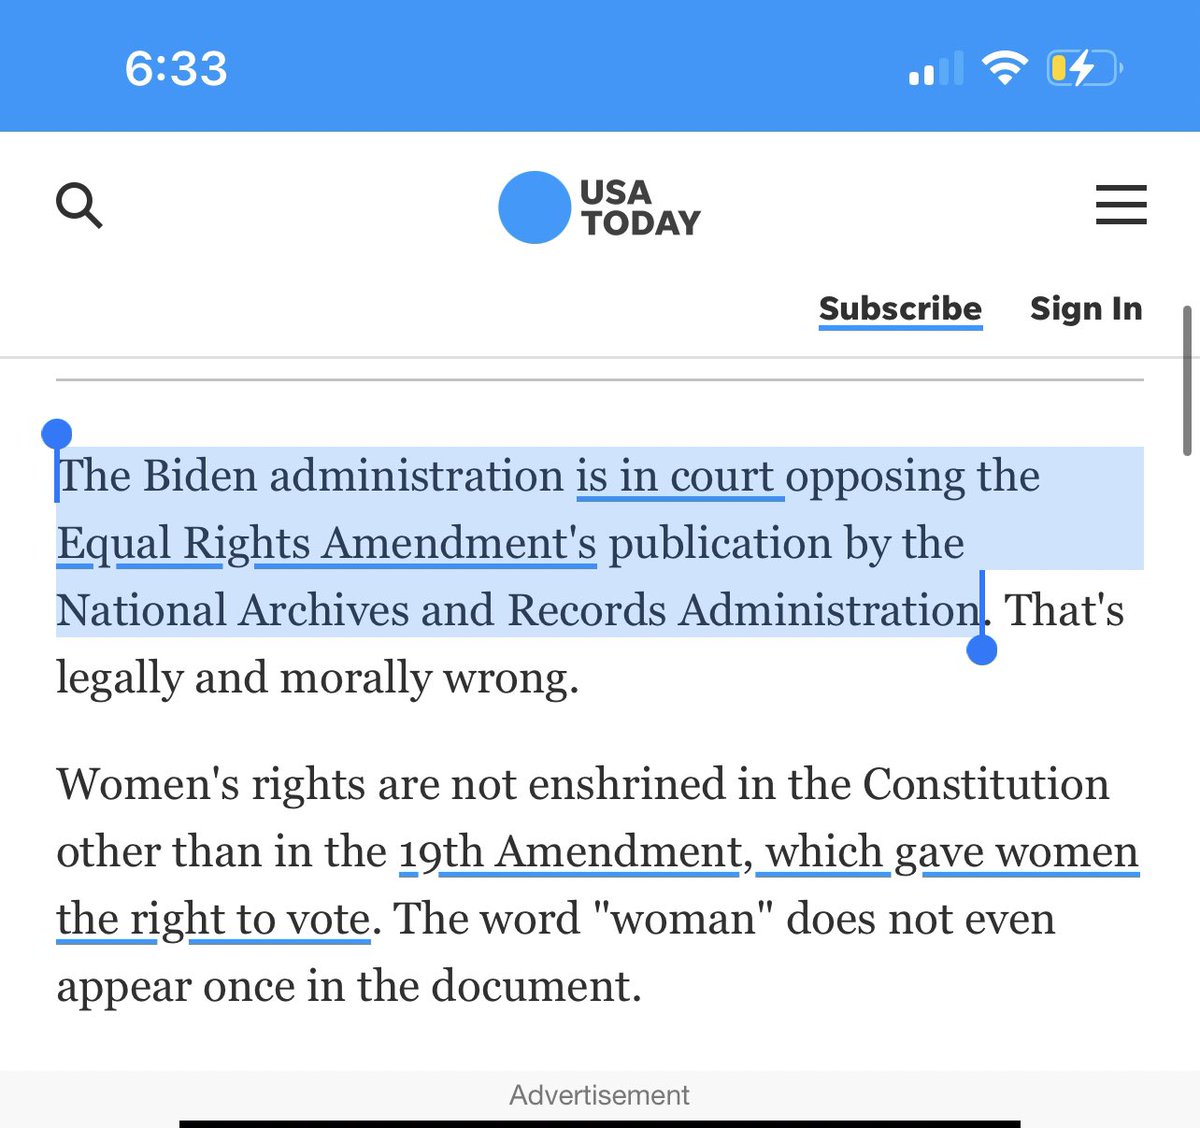 How dare the @JoeBiden administration fight against the Equal Rights Amendment in court and then gaslight people about it by saying Congress needs to act.

The EXECUTIVE has to publish the ERA.

You’re not allies.

#publishtheERA https://t.co/cHdcNapFqk https://t.co/eeNW79voUz